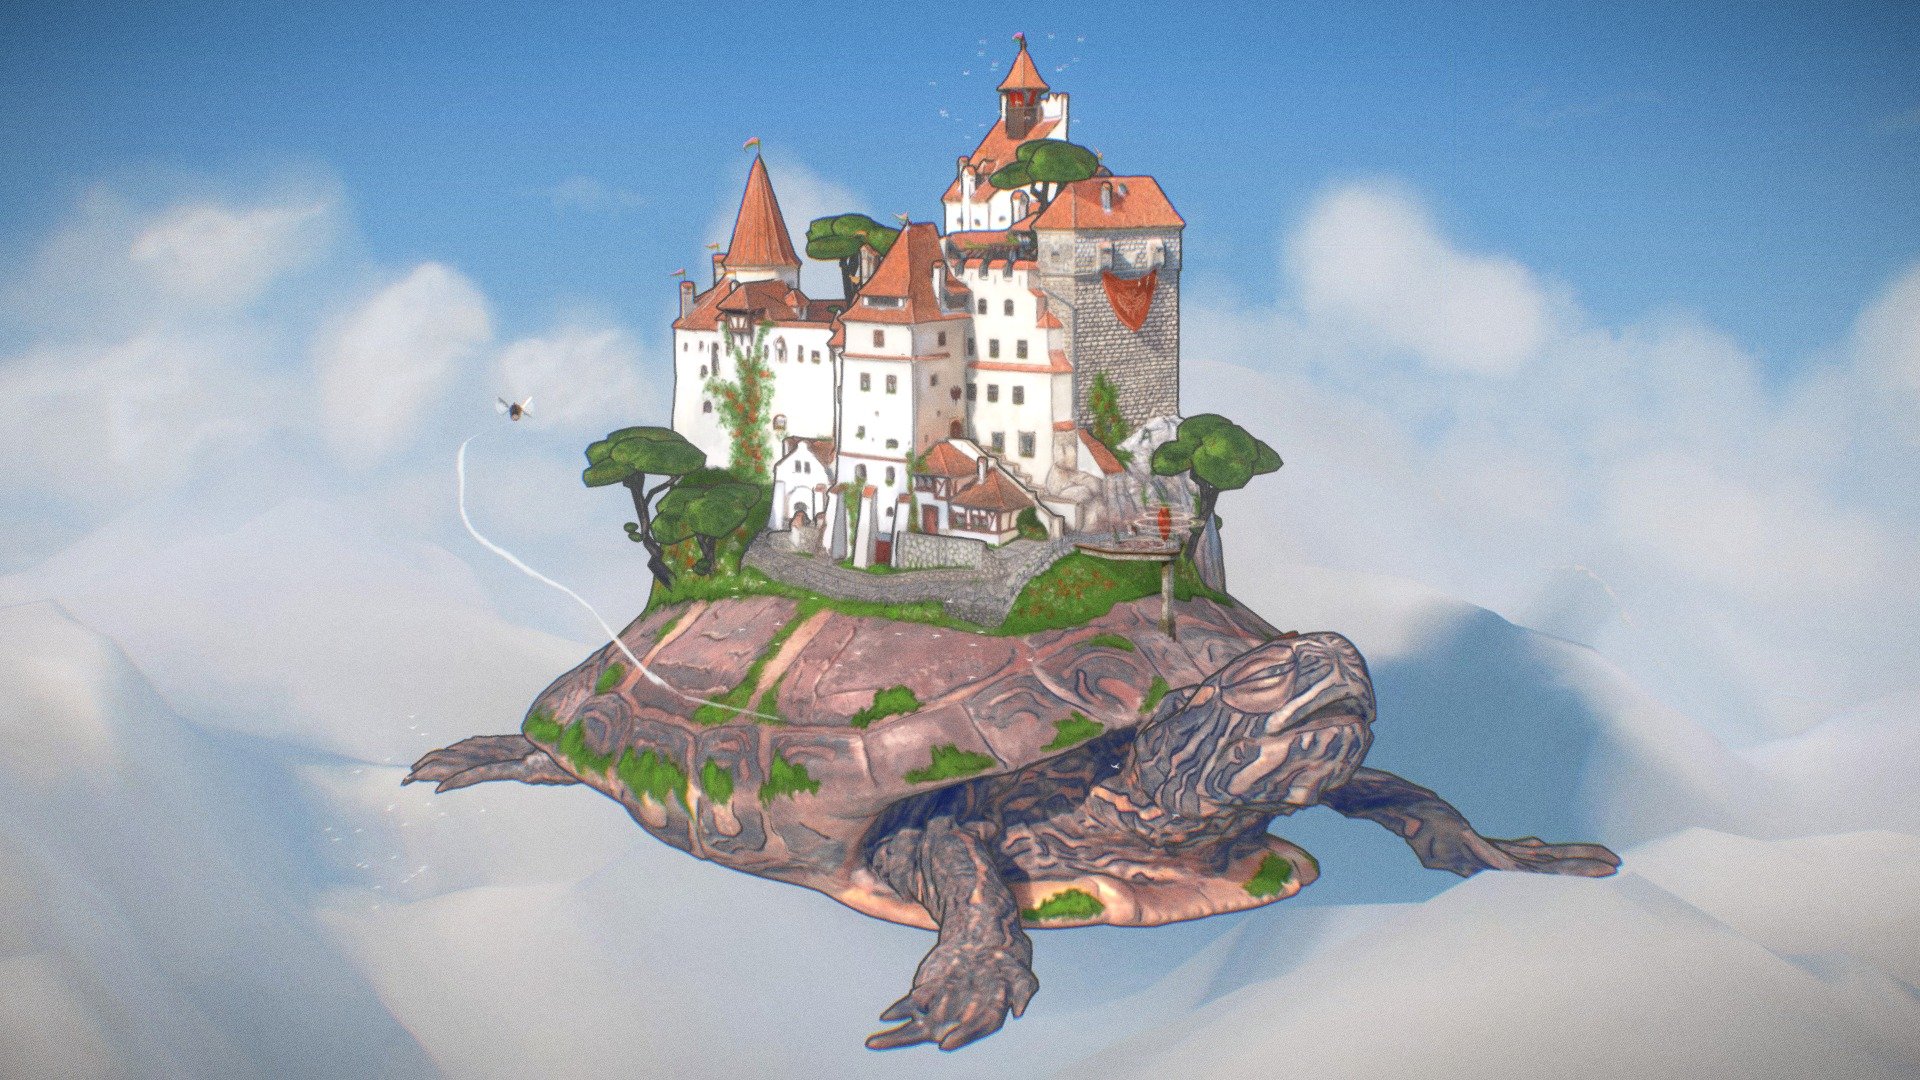 A castle on a floating turtle cruising through the skies. I made this by kitbashing two different photogrammetry models (turtle, Bran castle) and projection mapping in Blender+Photoshop. 

I wrote a post covering how to make stylized painterly 3D scenes, if you would like to know more details on the how it is done: https://medium.com/@shahriyarshahrabi/creating-painterly-3d-scenes-preparing-assets-for-npr-8d6c726cc34f - Floating Castle - Download Free 3D model by Shahriar Shahrabi (@shahriyarshahrabi) 3d model